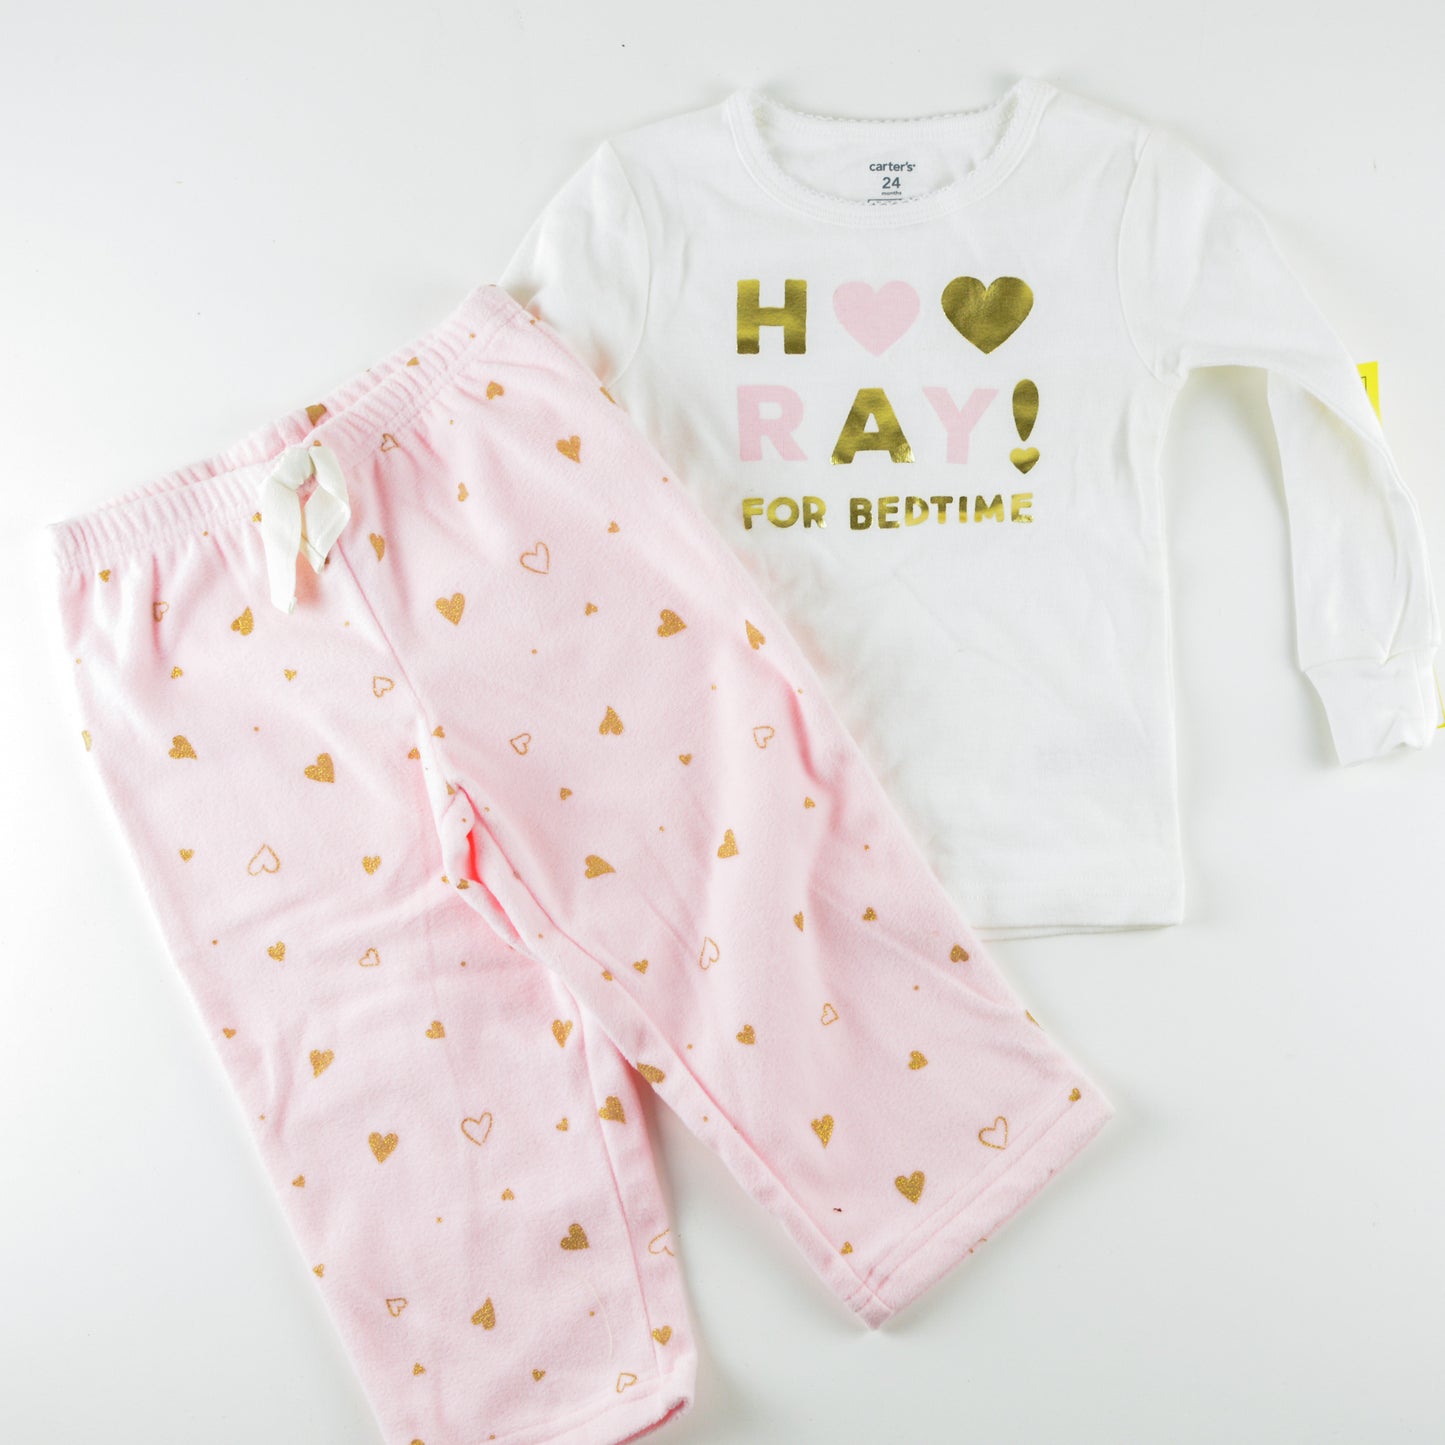 HOO RAY For Bedtime Pajamas 24 months